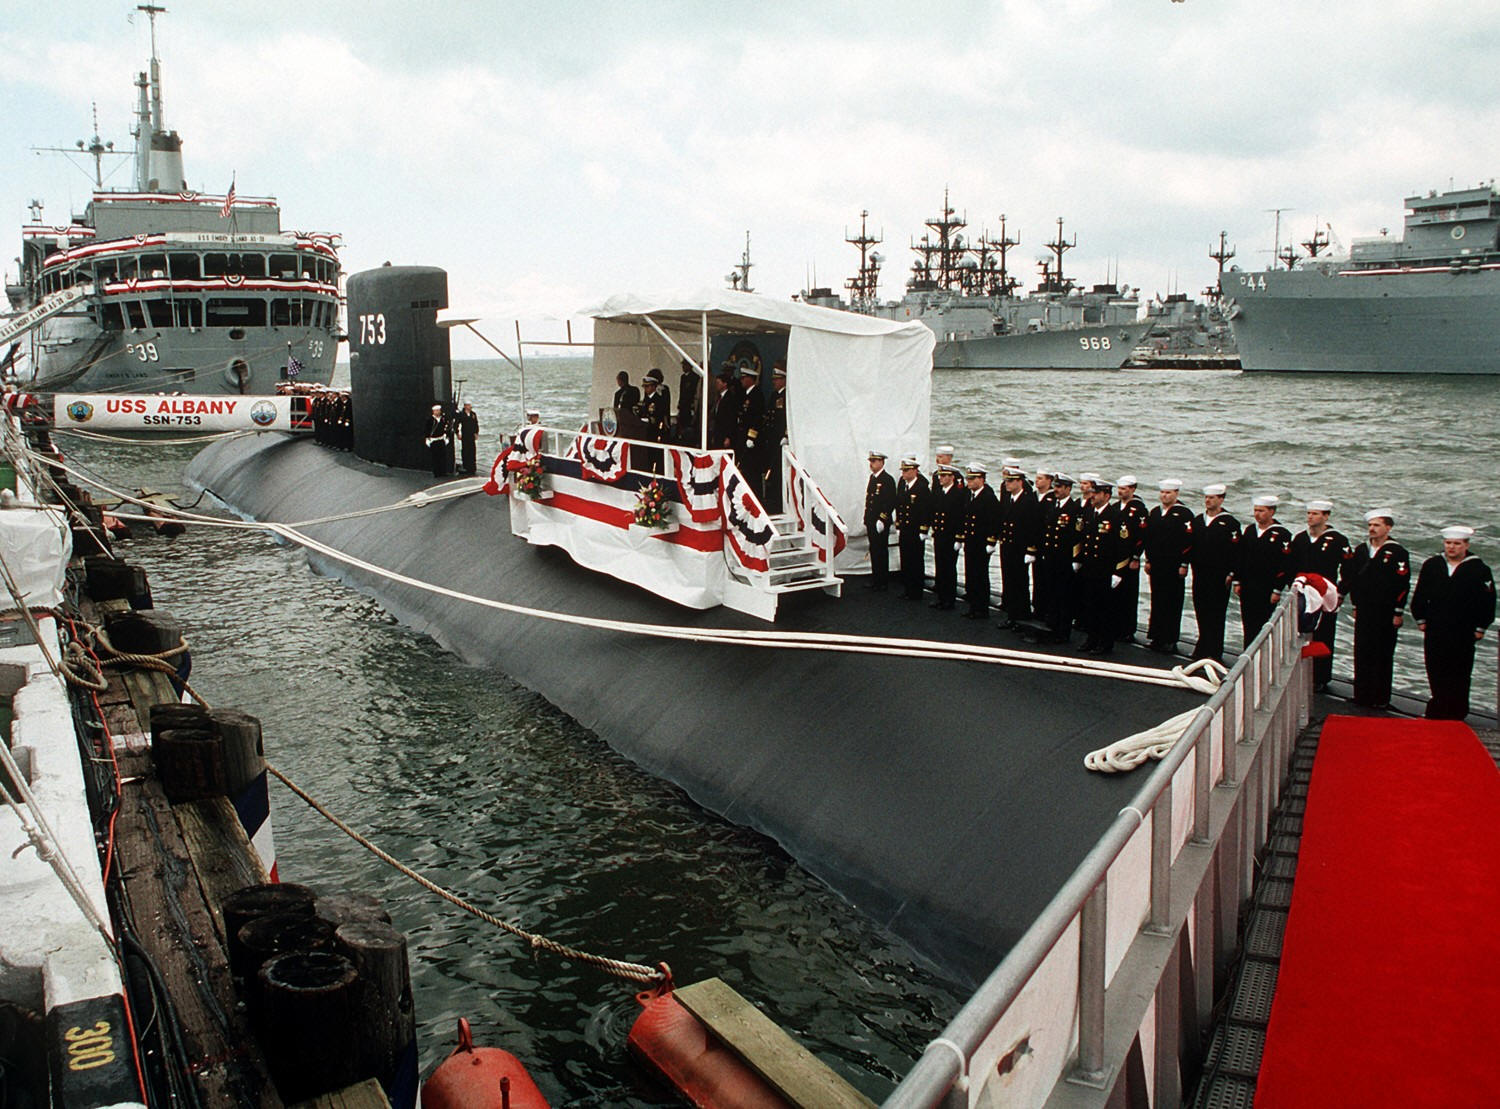 ssn-753 uss albany commissioning ceremony april 1990